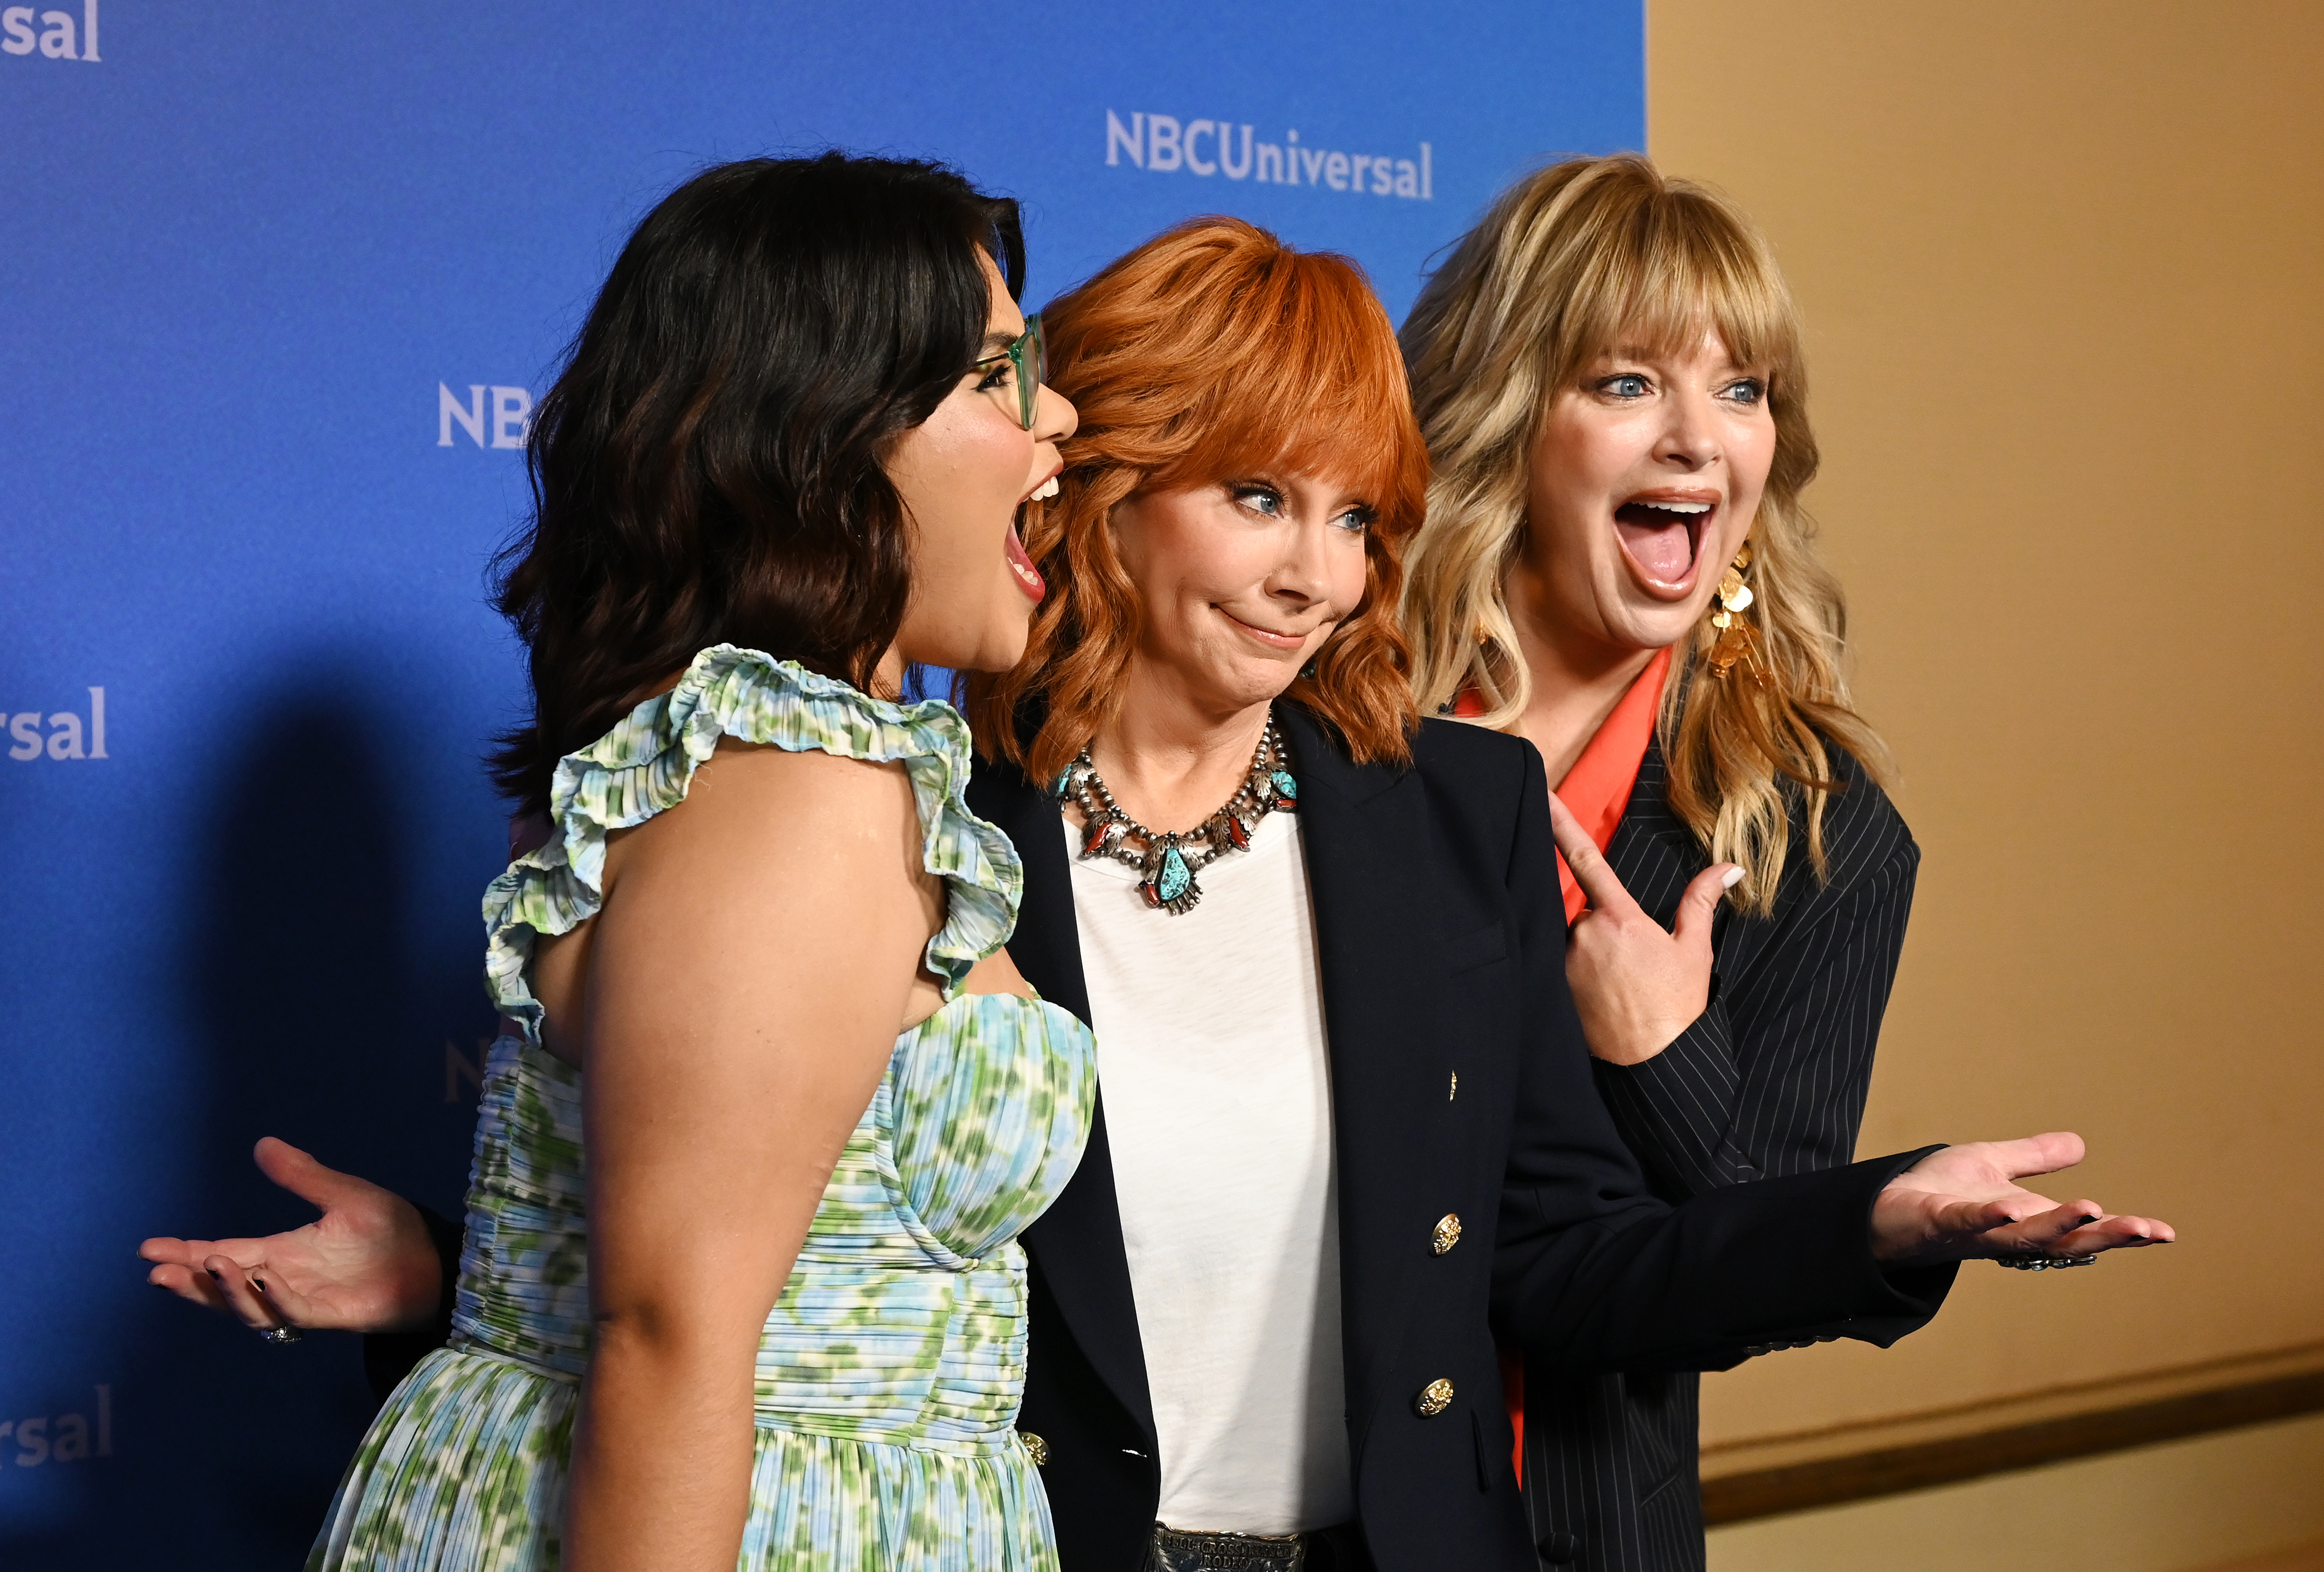 Belissa Escobedo, Reba McEntire and Melissa Peterman, pictured during the NBCUniversal Summer Press Tour, will appear in the show set around a bar